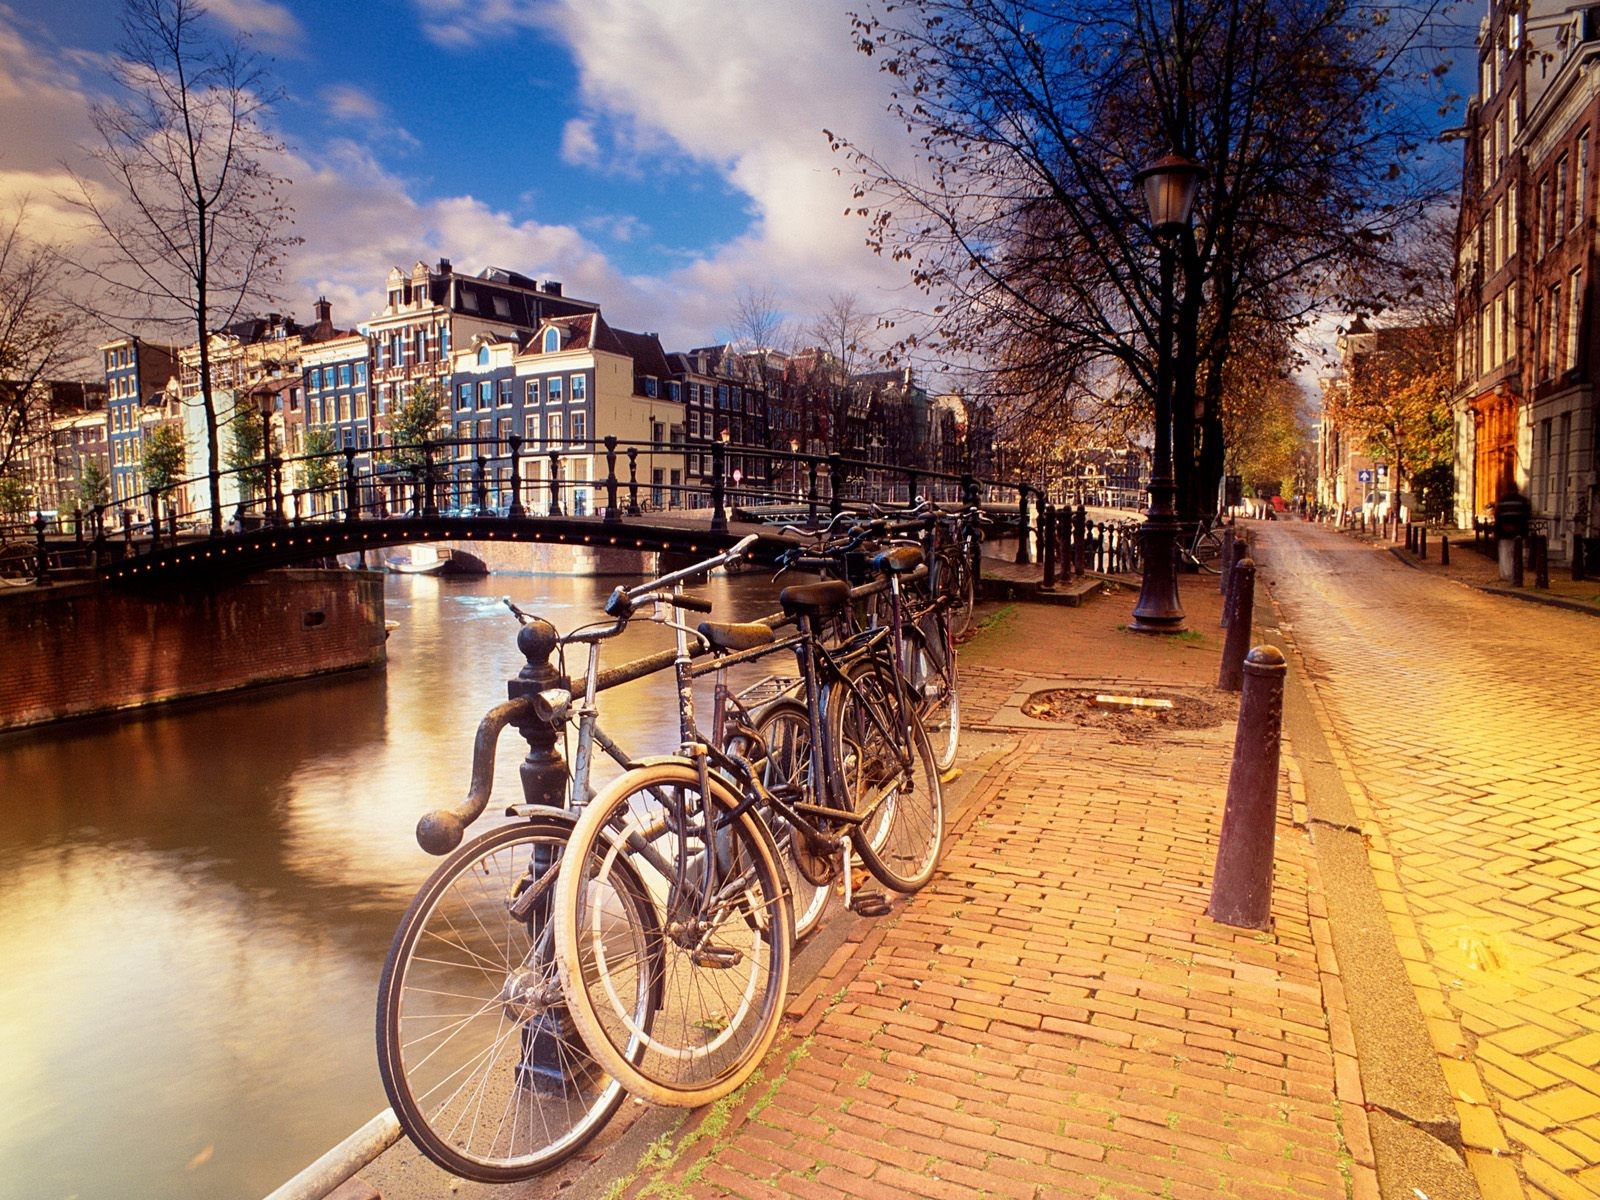 General 1600x1200 Amsterdam Netherlands canal cityscape city street bicycle vehicle urban